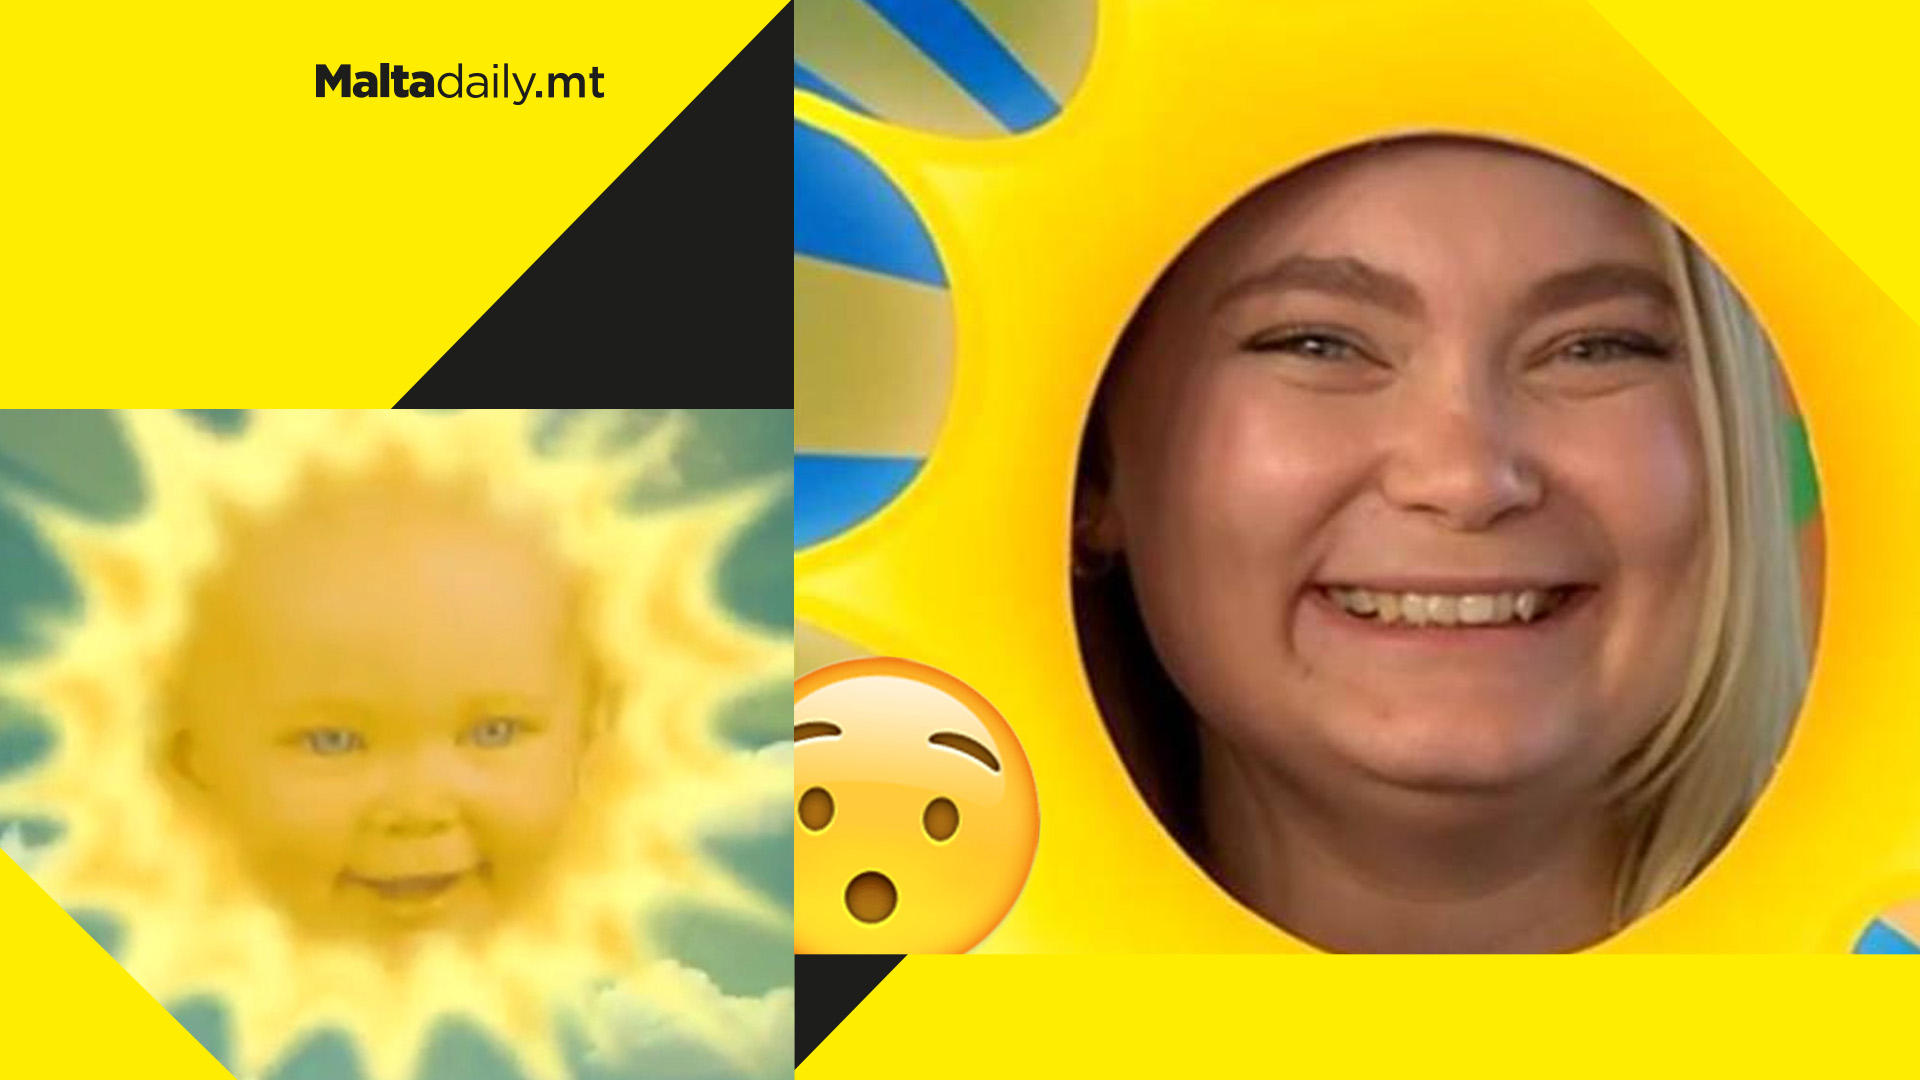 Feel old yet? The baby sun from Teletubbies returns to TV as a 25-year-old woman